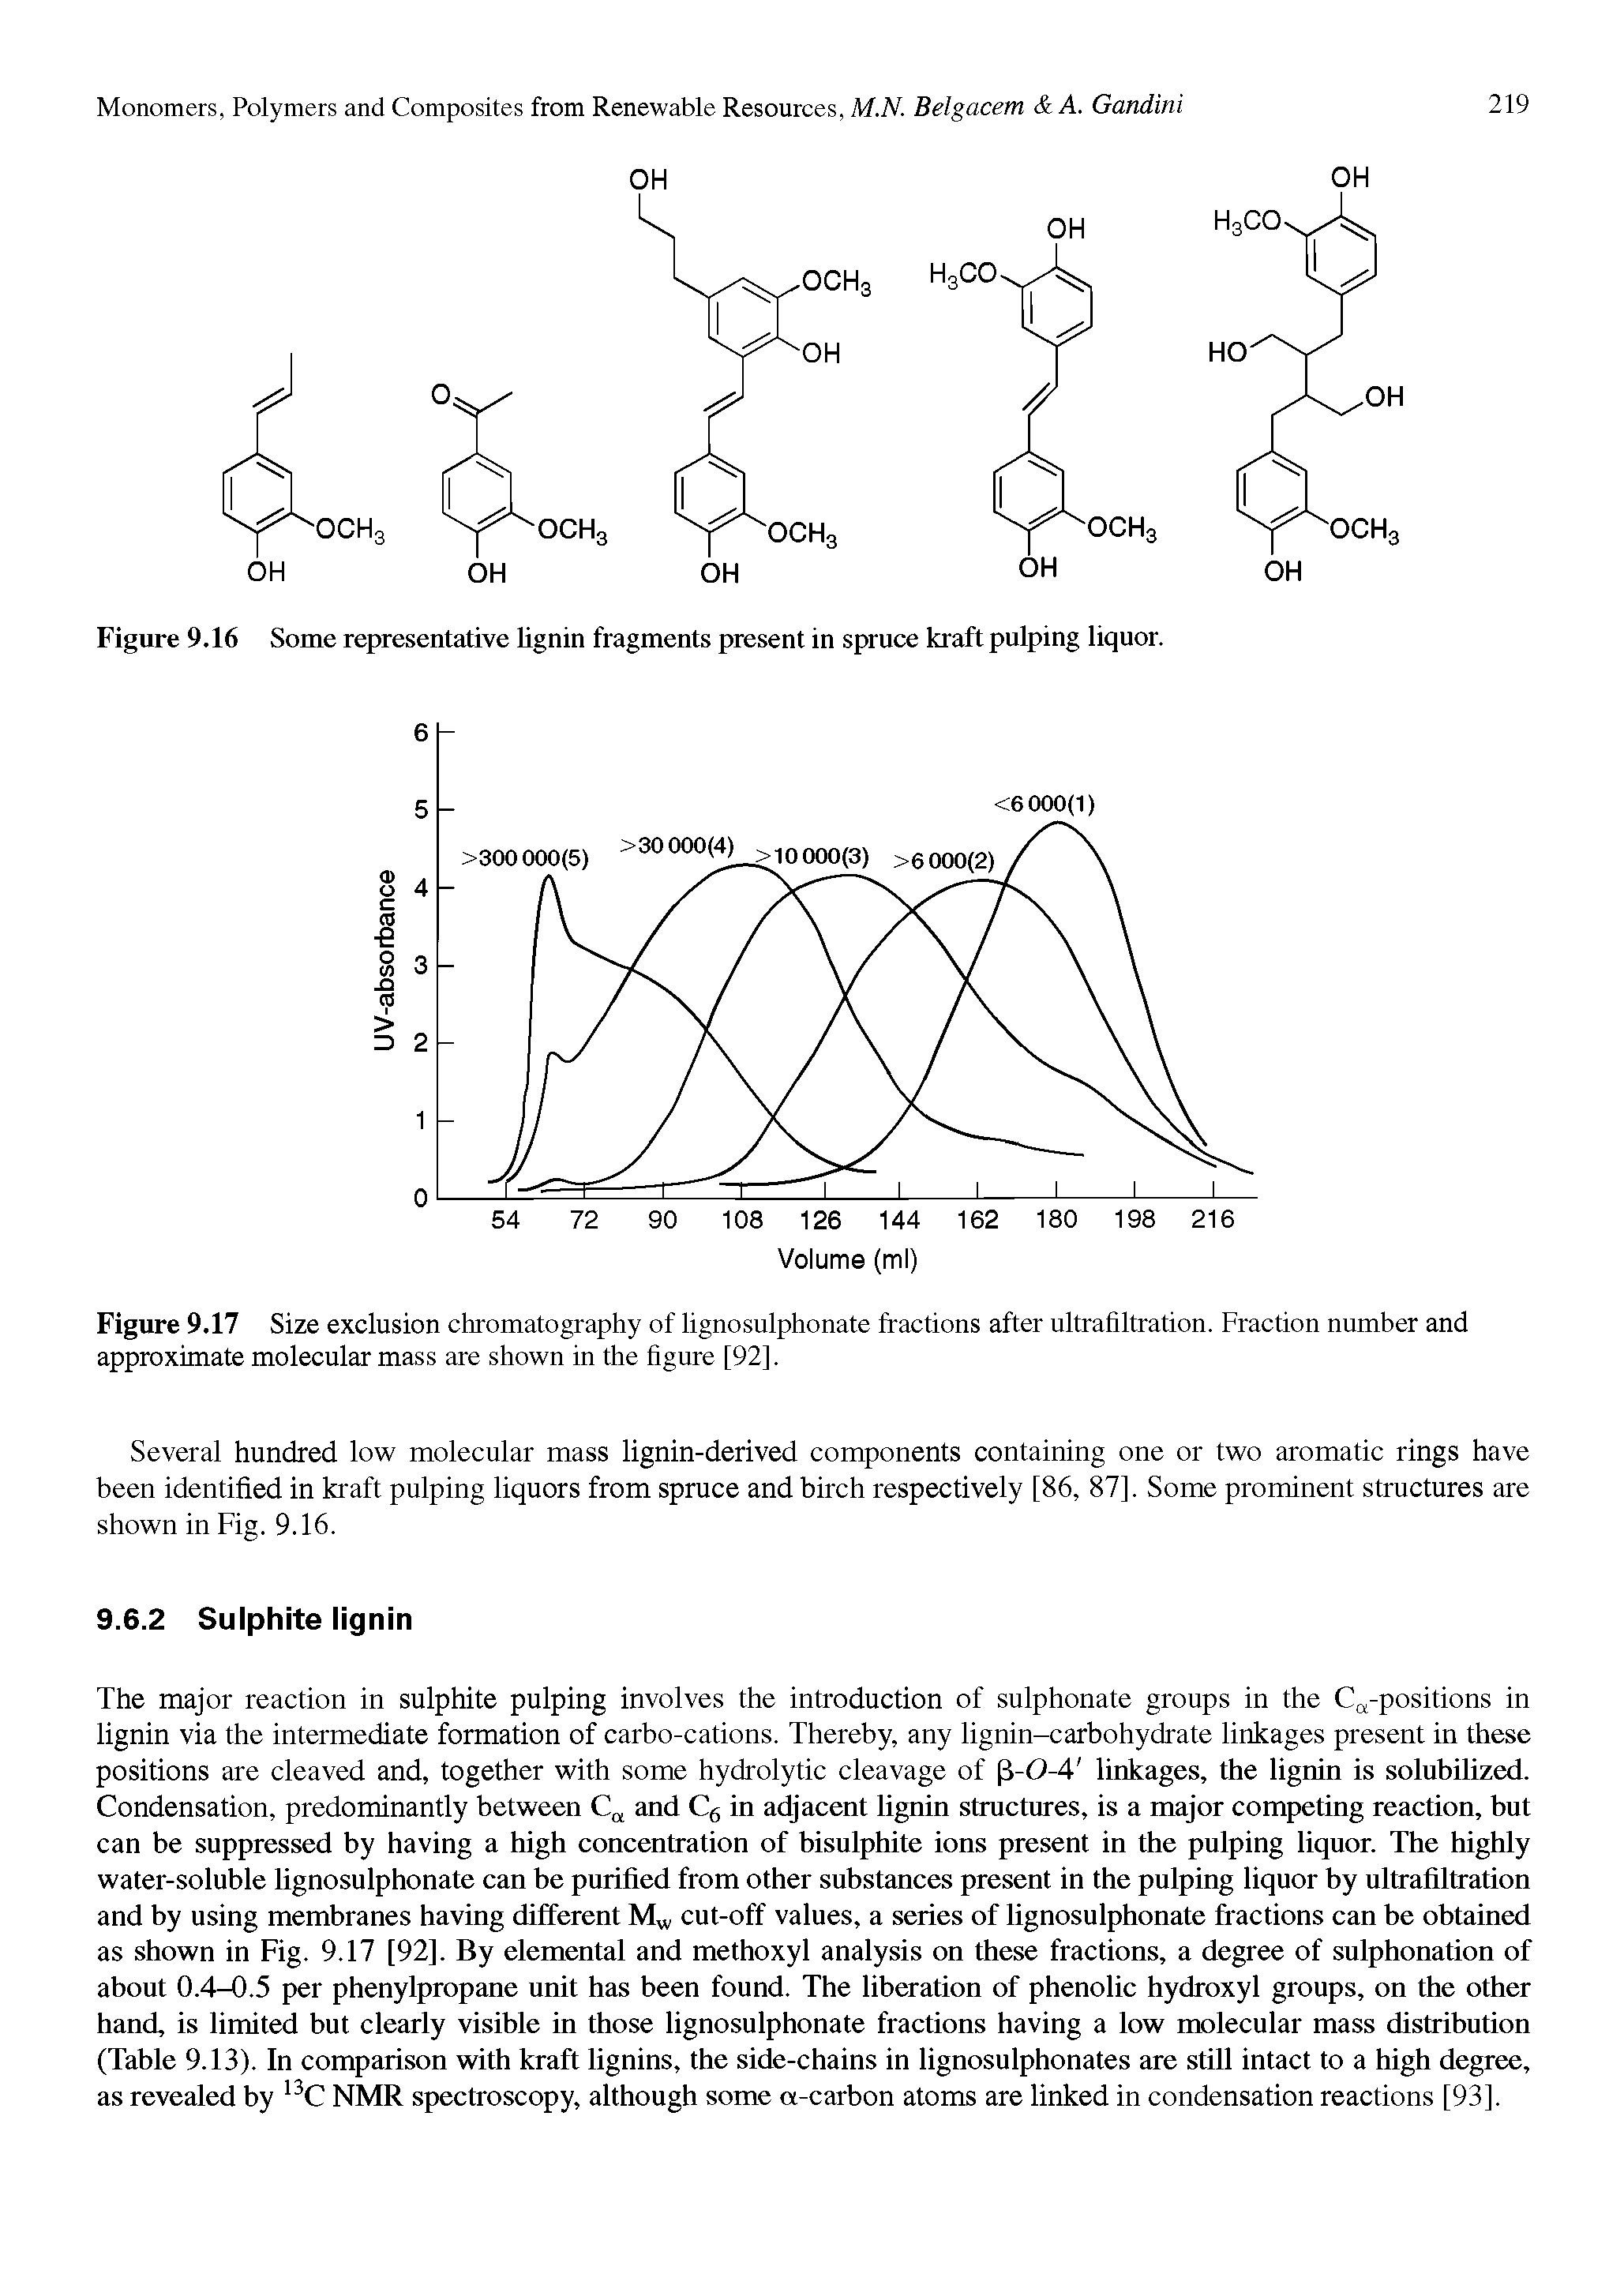 Figure 9.17 Size exclusion chromatography of lignosulphonate fractions after ultrafiltration. Fraction number and approximate molecular mass are shown in the figure [92].